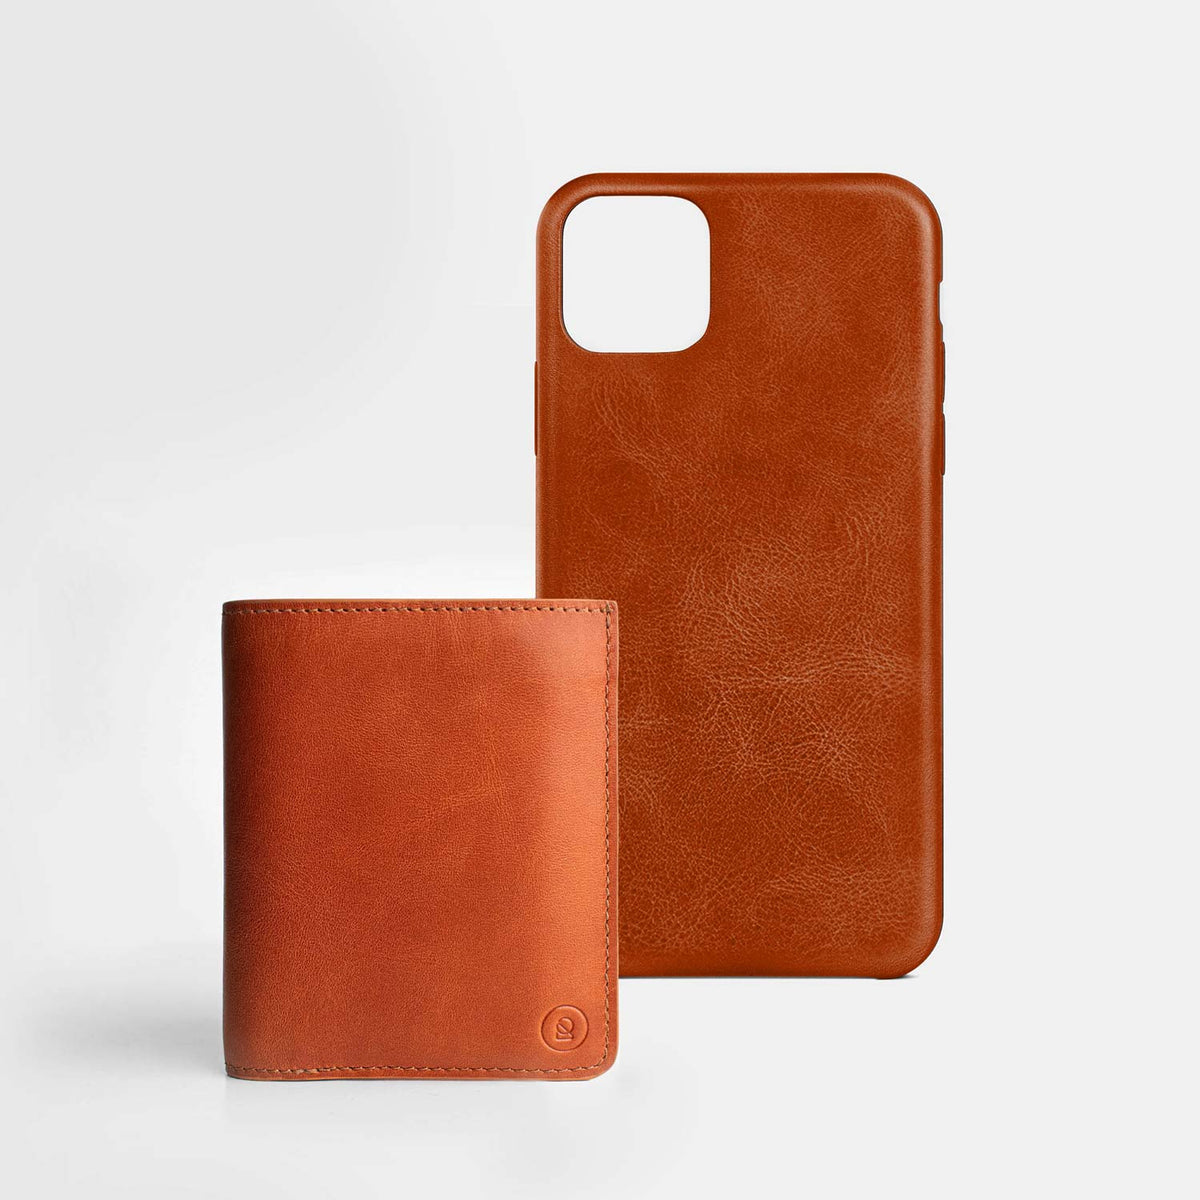 Leather iPhone 12 Pro Max Shell Case - Saddle Brown - RYAN London